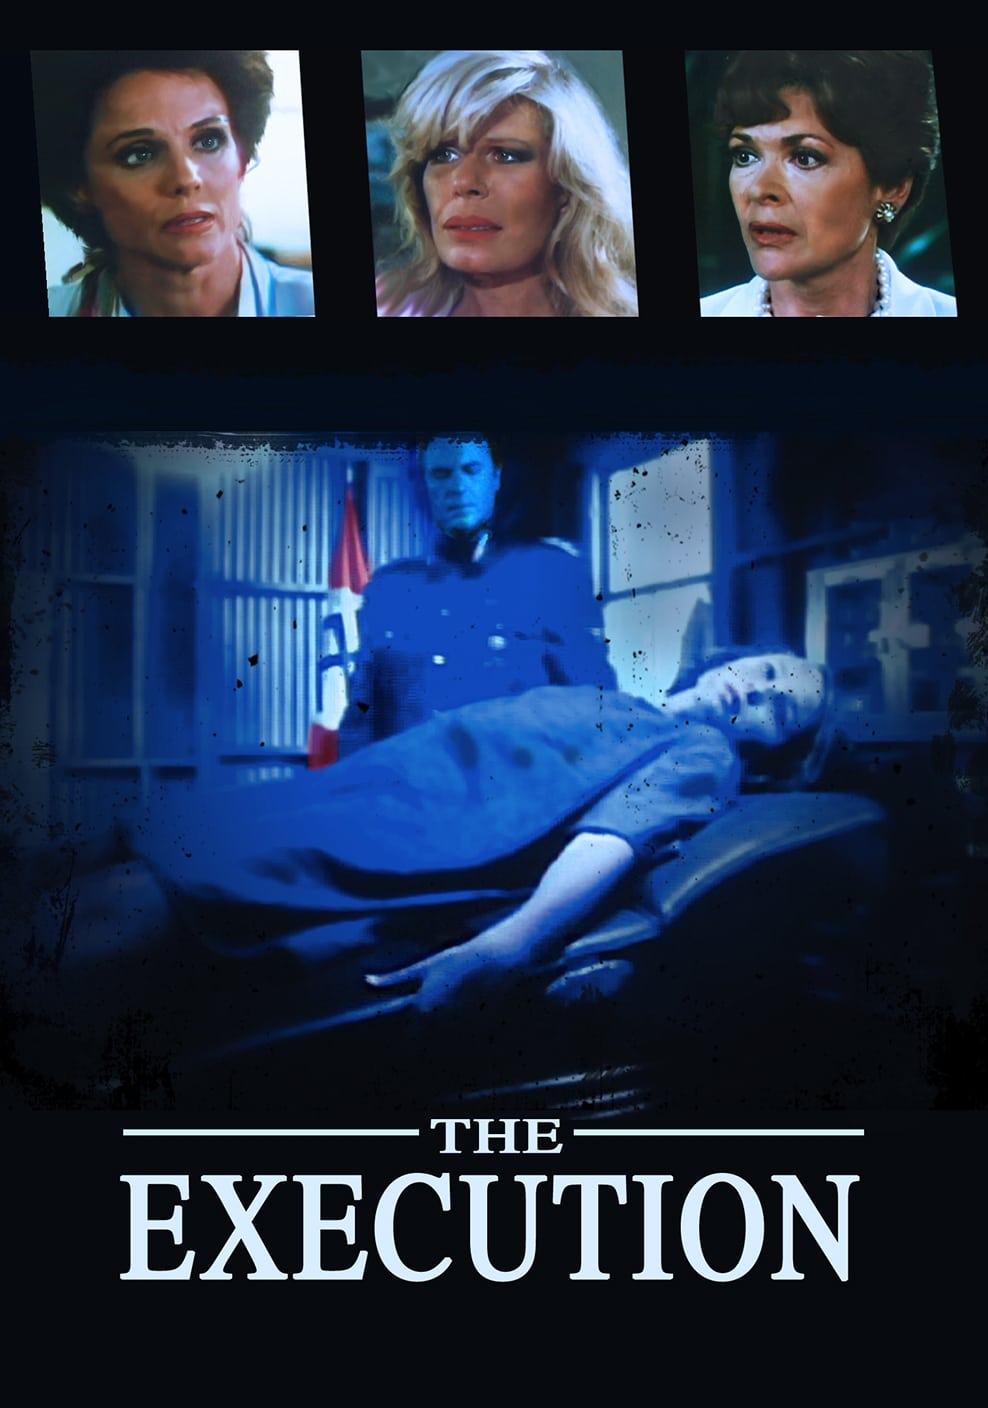 The Execution (1985)